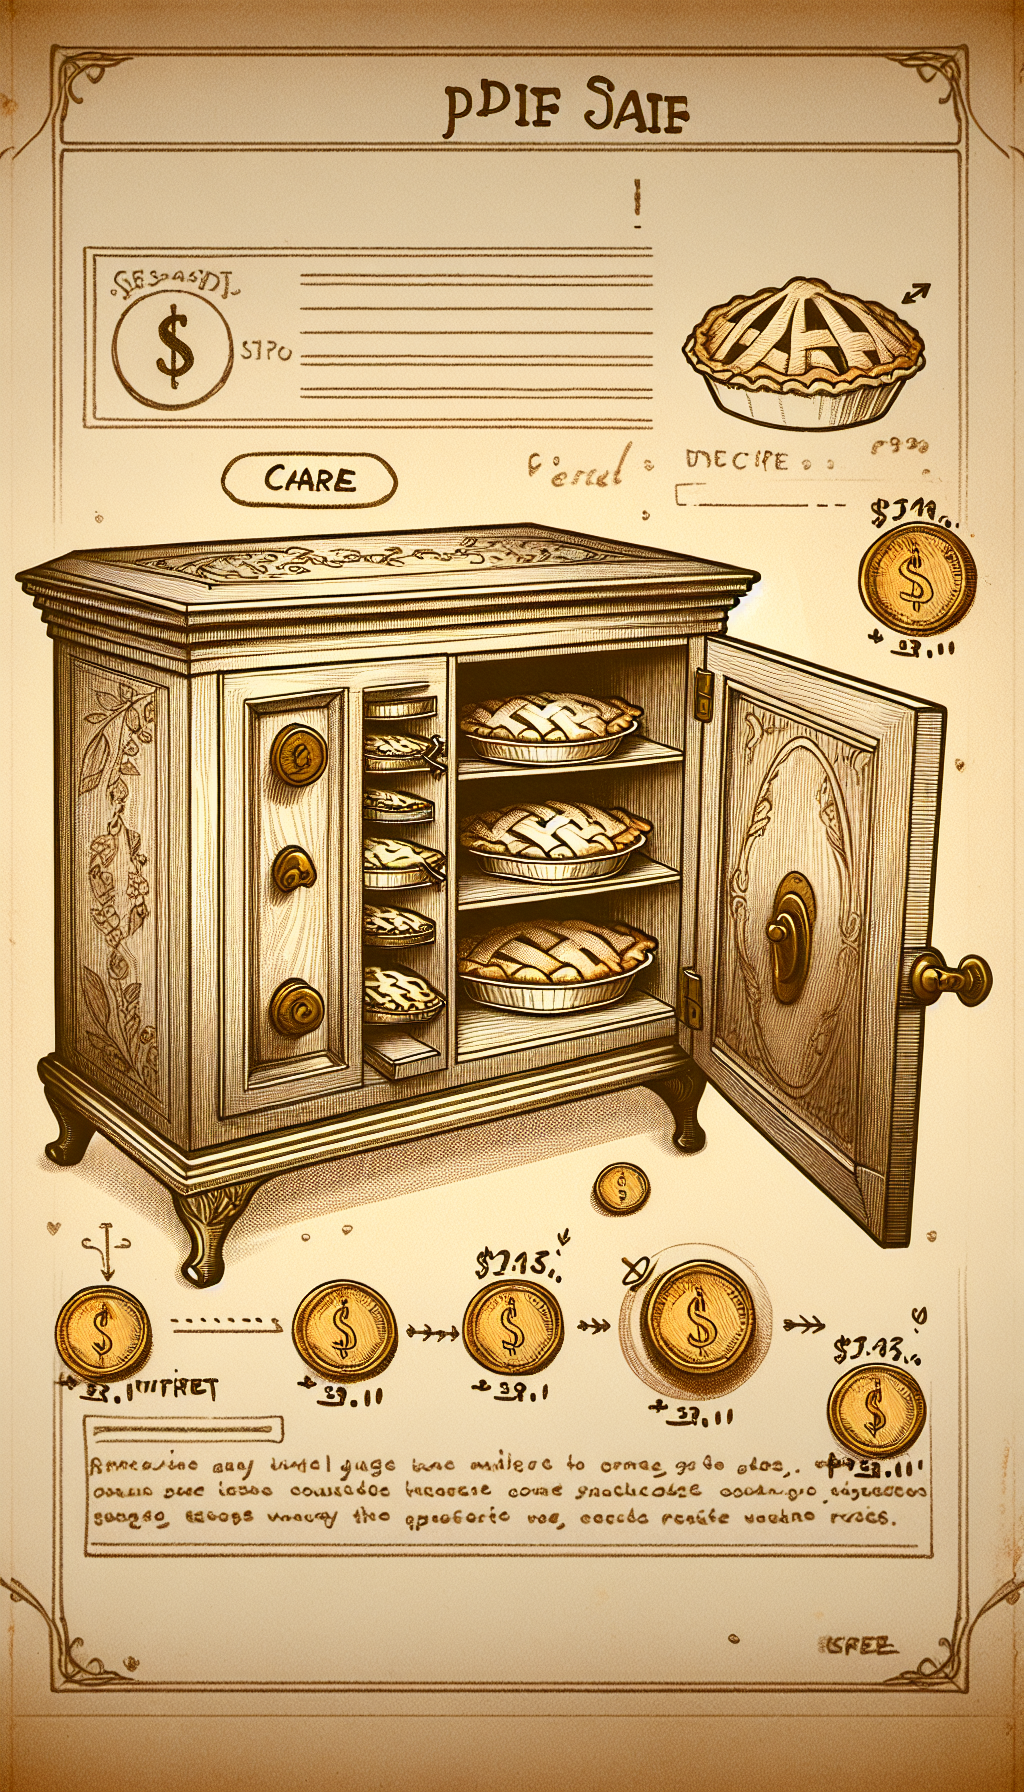 A whimsical, sepia-toned illustration features a hand-drawn outline of an elegant antique pie safe, with golden coins and dollar signs subtly etched into its woodwork. The doors are slightly ajar to reveal vintage pies, each with a price tag indicating its rising value over time. Above, delicate care instructions float like recipe notes, ensuring the safe's longevity and worth.